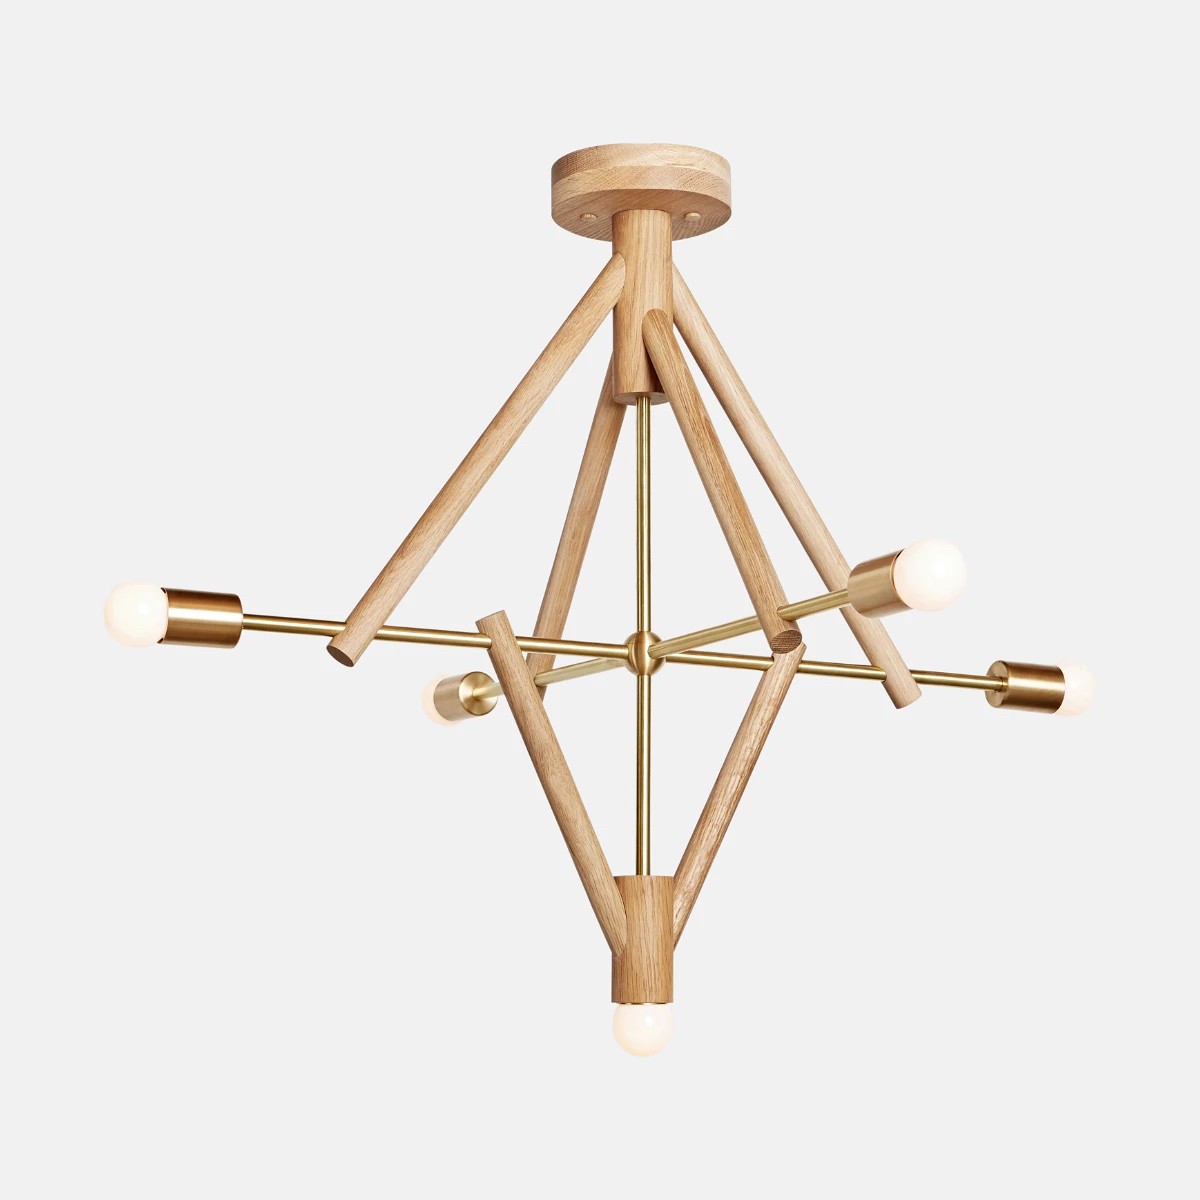 The image of an Lodge Chandelier V product